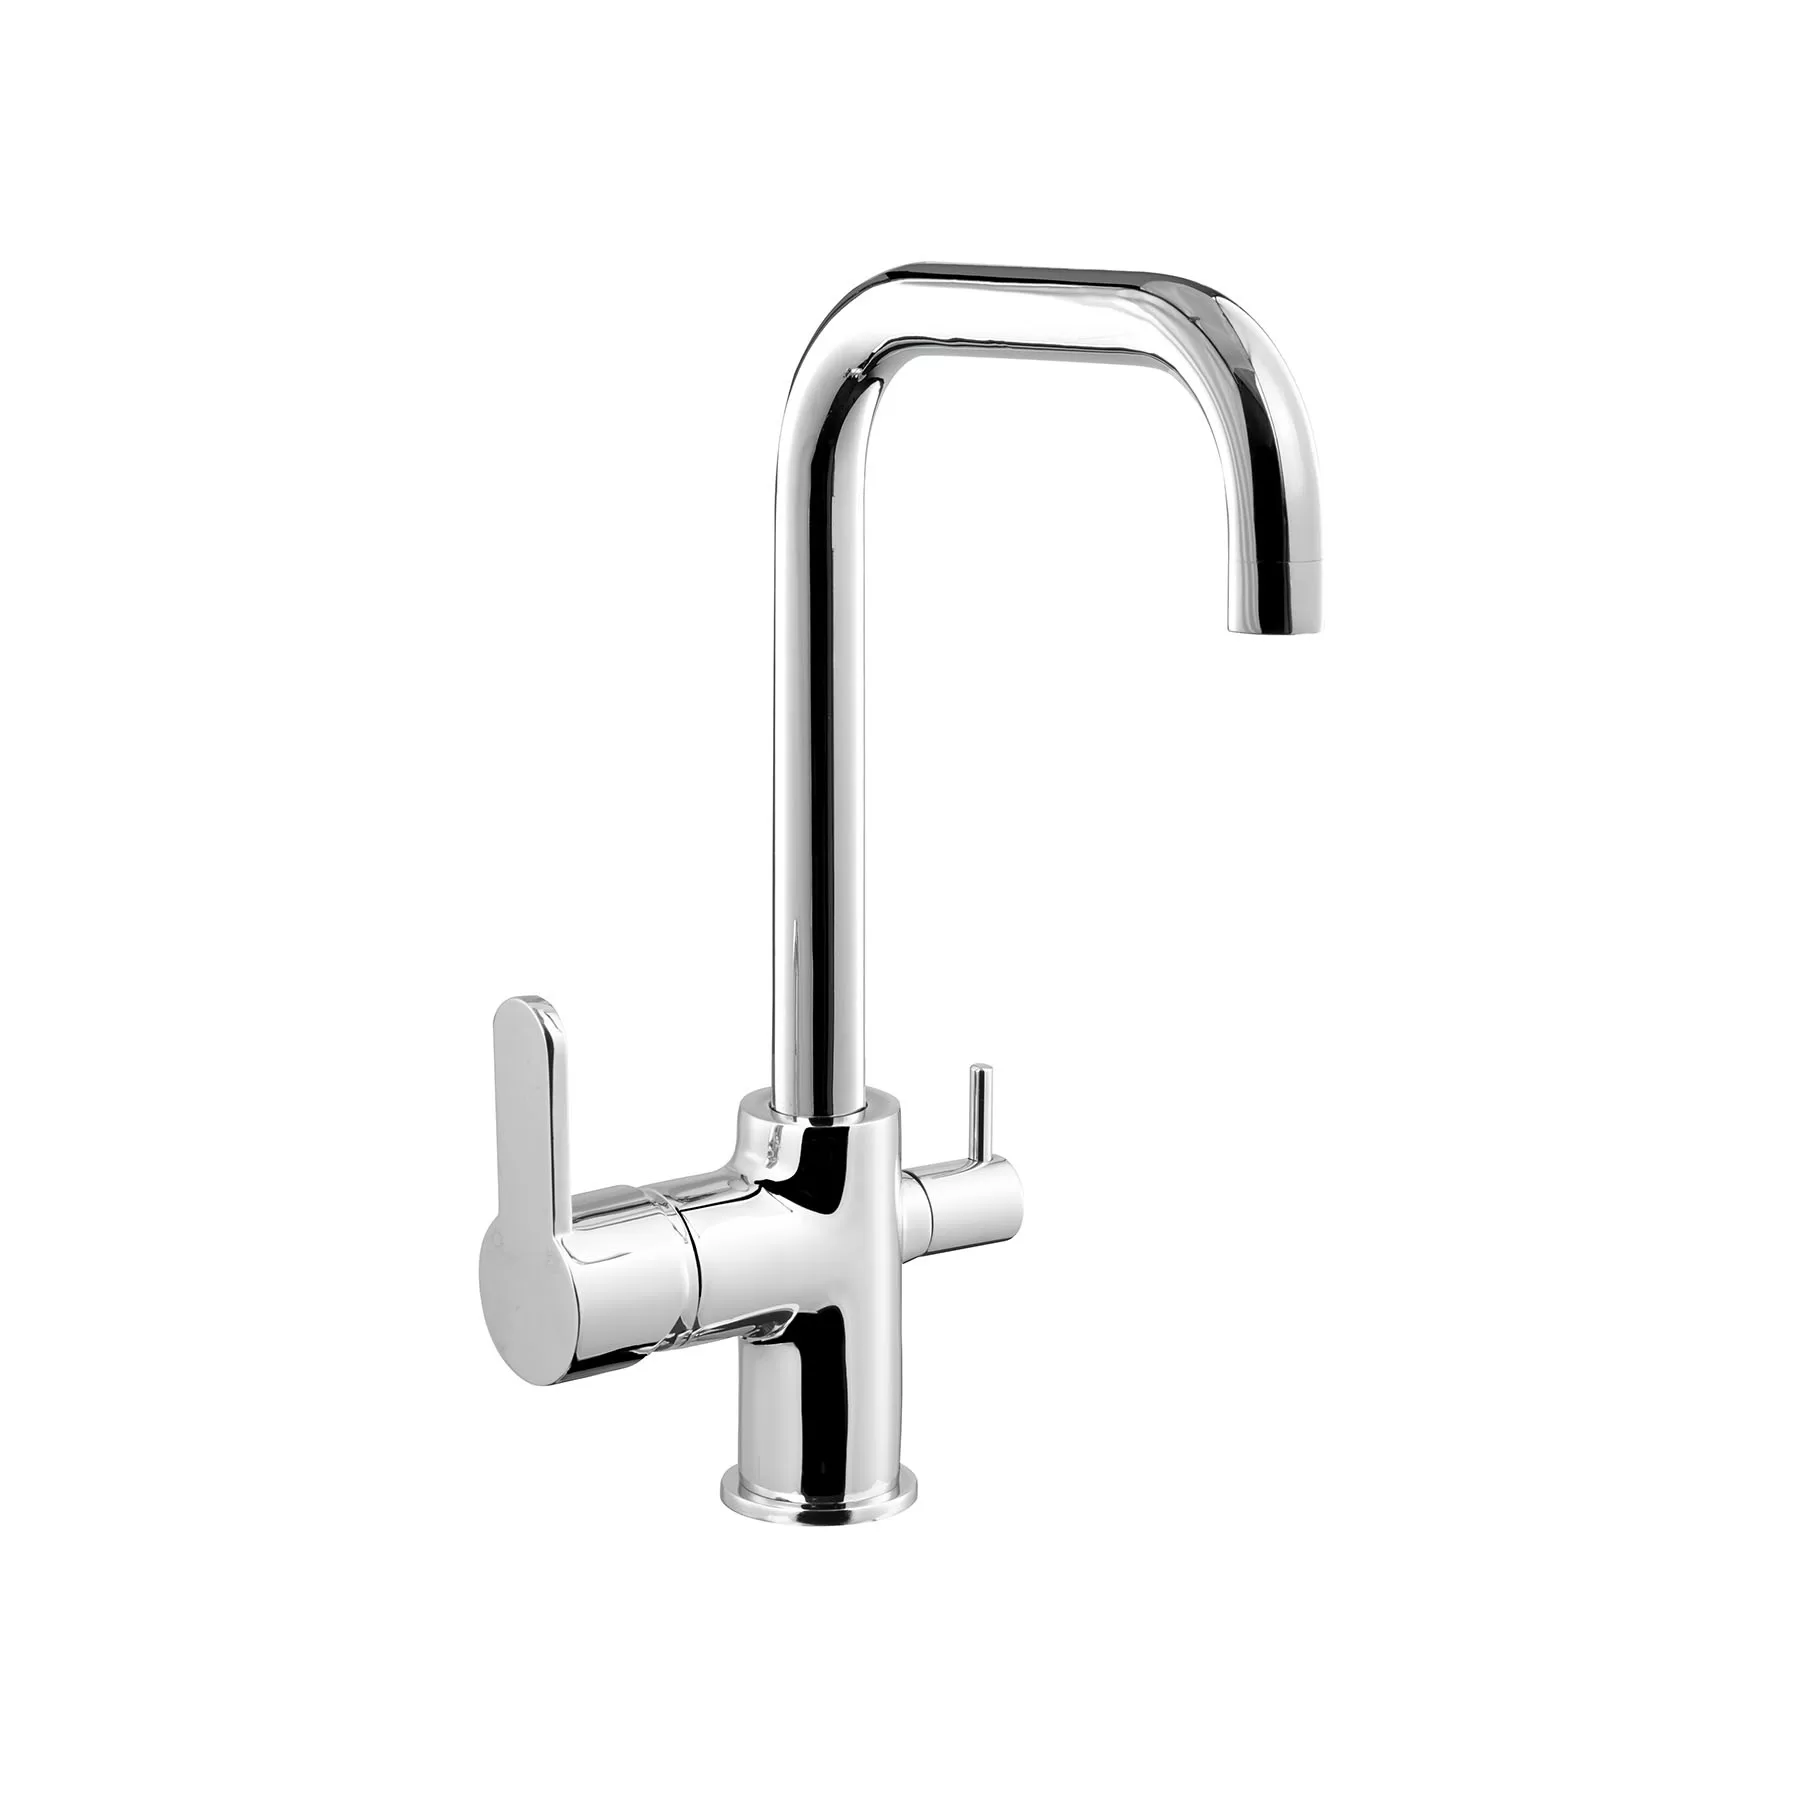 PU15494451, PURITY LENTO PRO KITCHEN FAUCET W.OUTLET FOR FILTERED WATER SWIVEL SPOUT 1/2″ FLEX